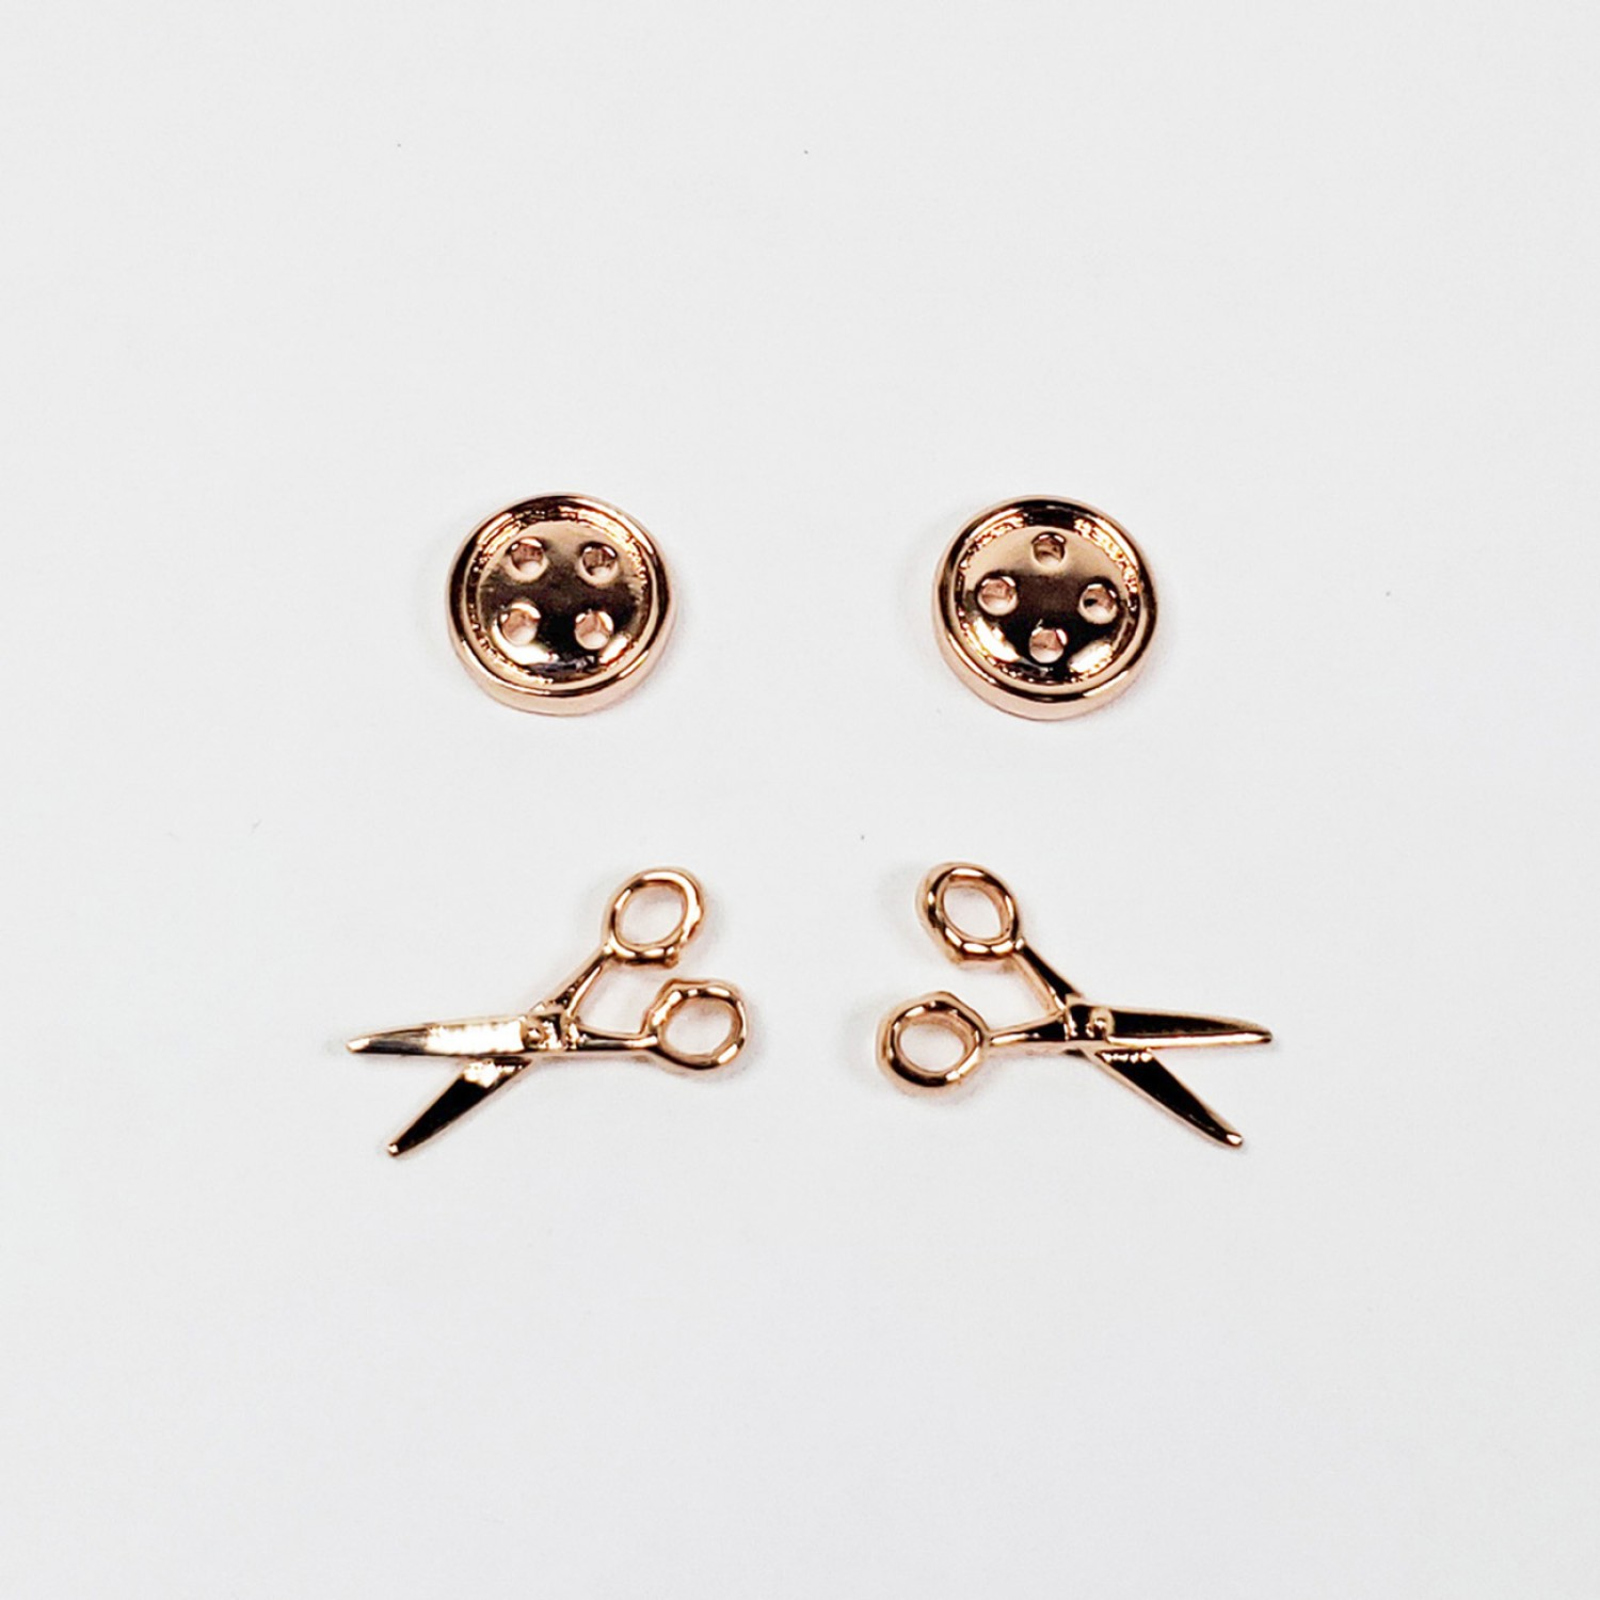 Quilt Button and Scissors Earring Set of 2 Rose Gold